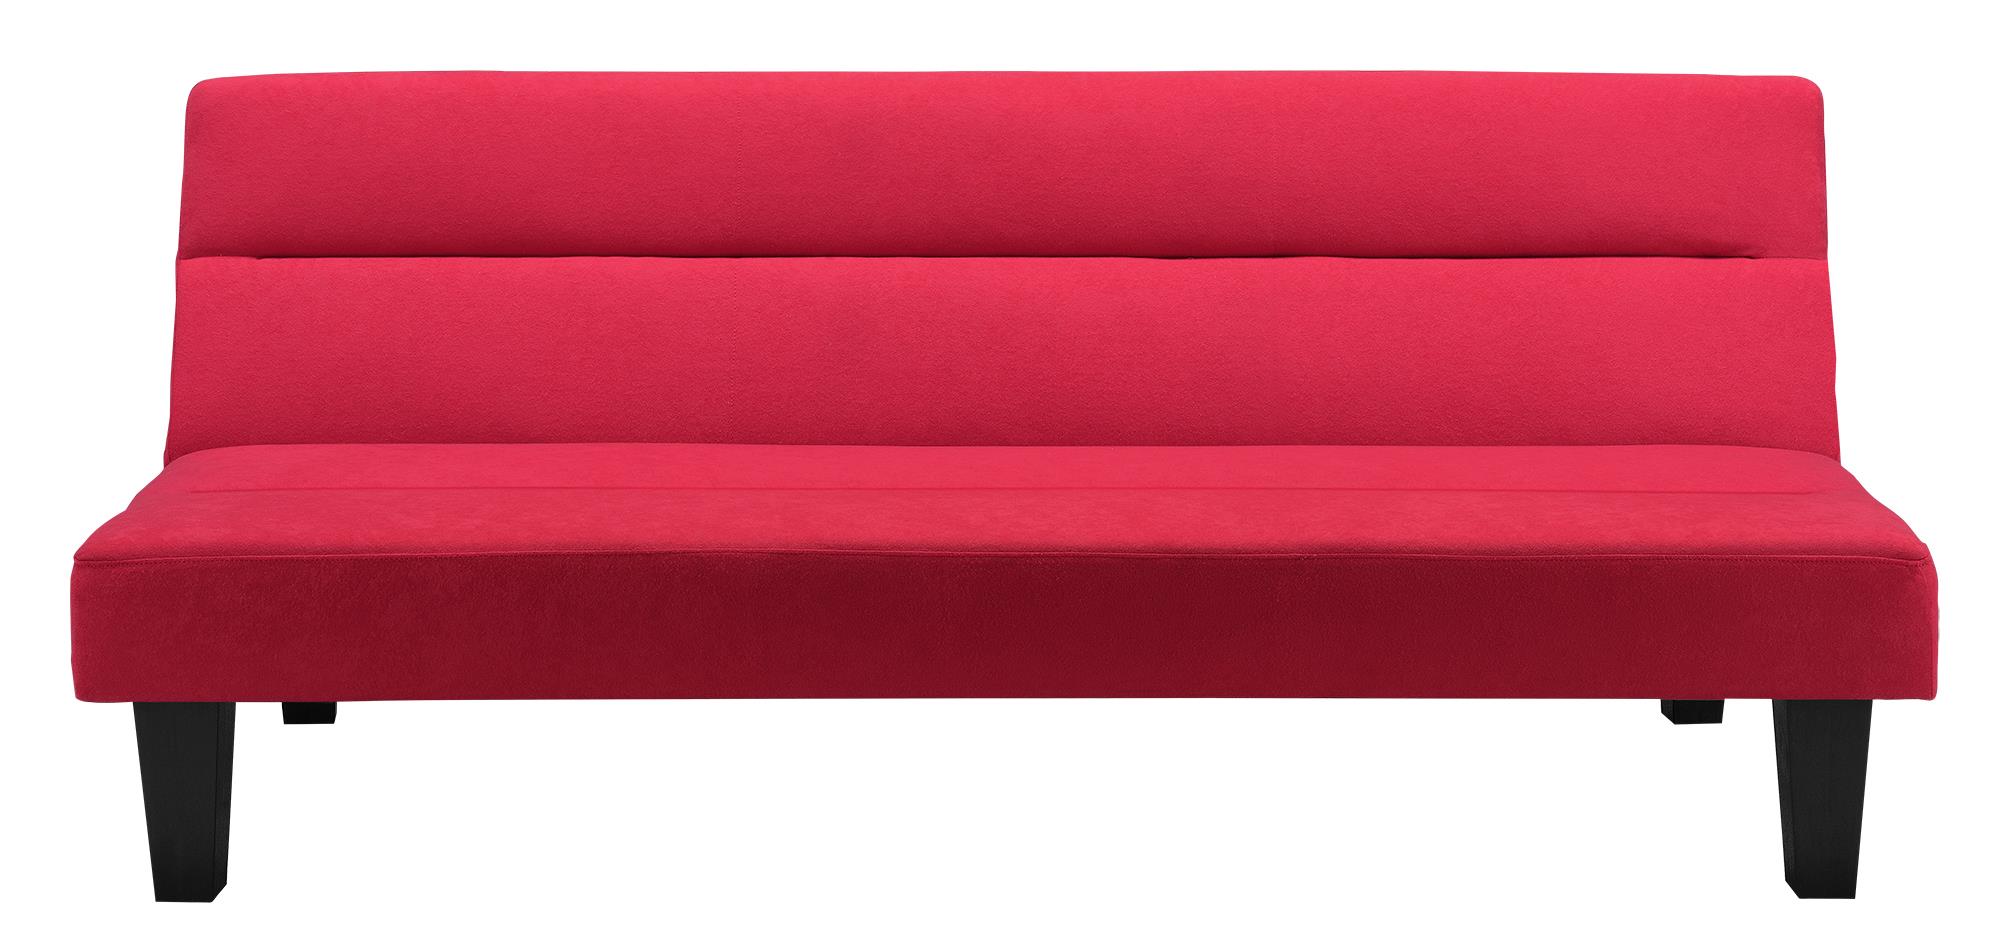 DHP Kebo Futon with Microfiber Cover, Red - image 9 of 13